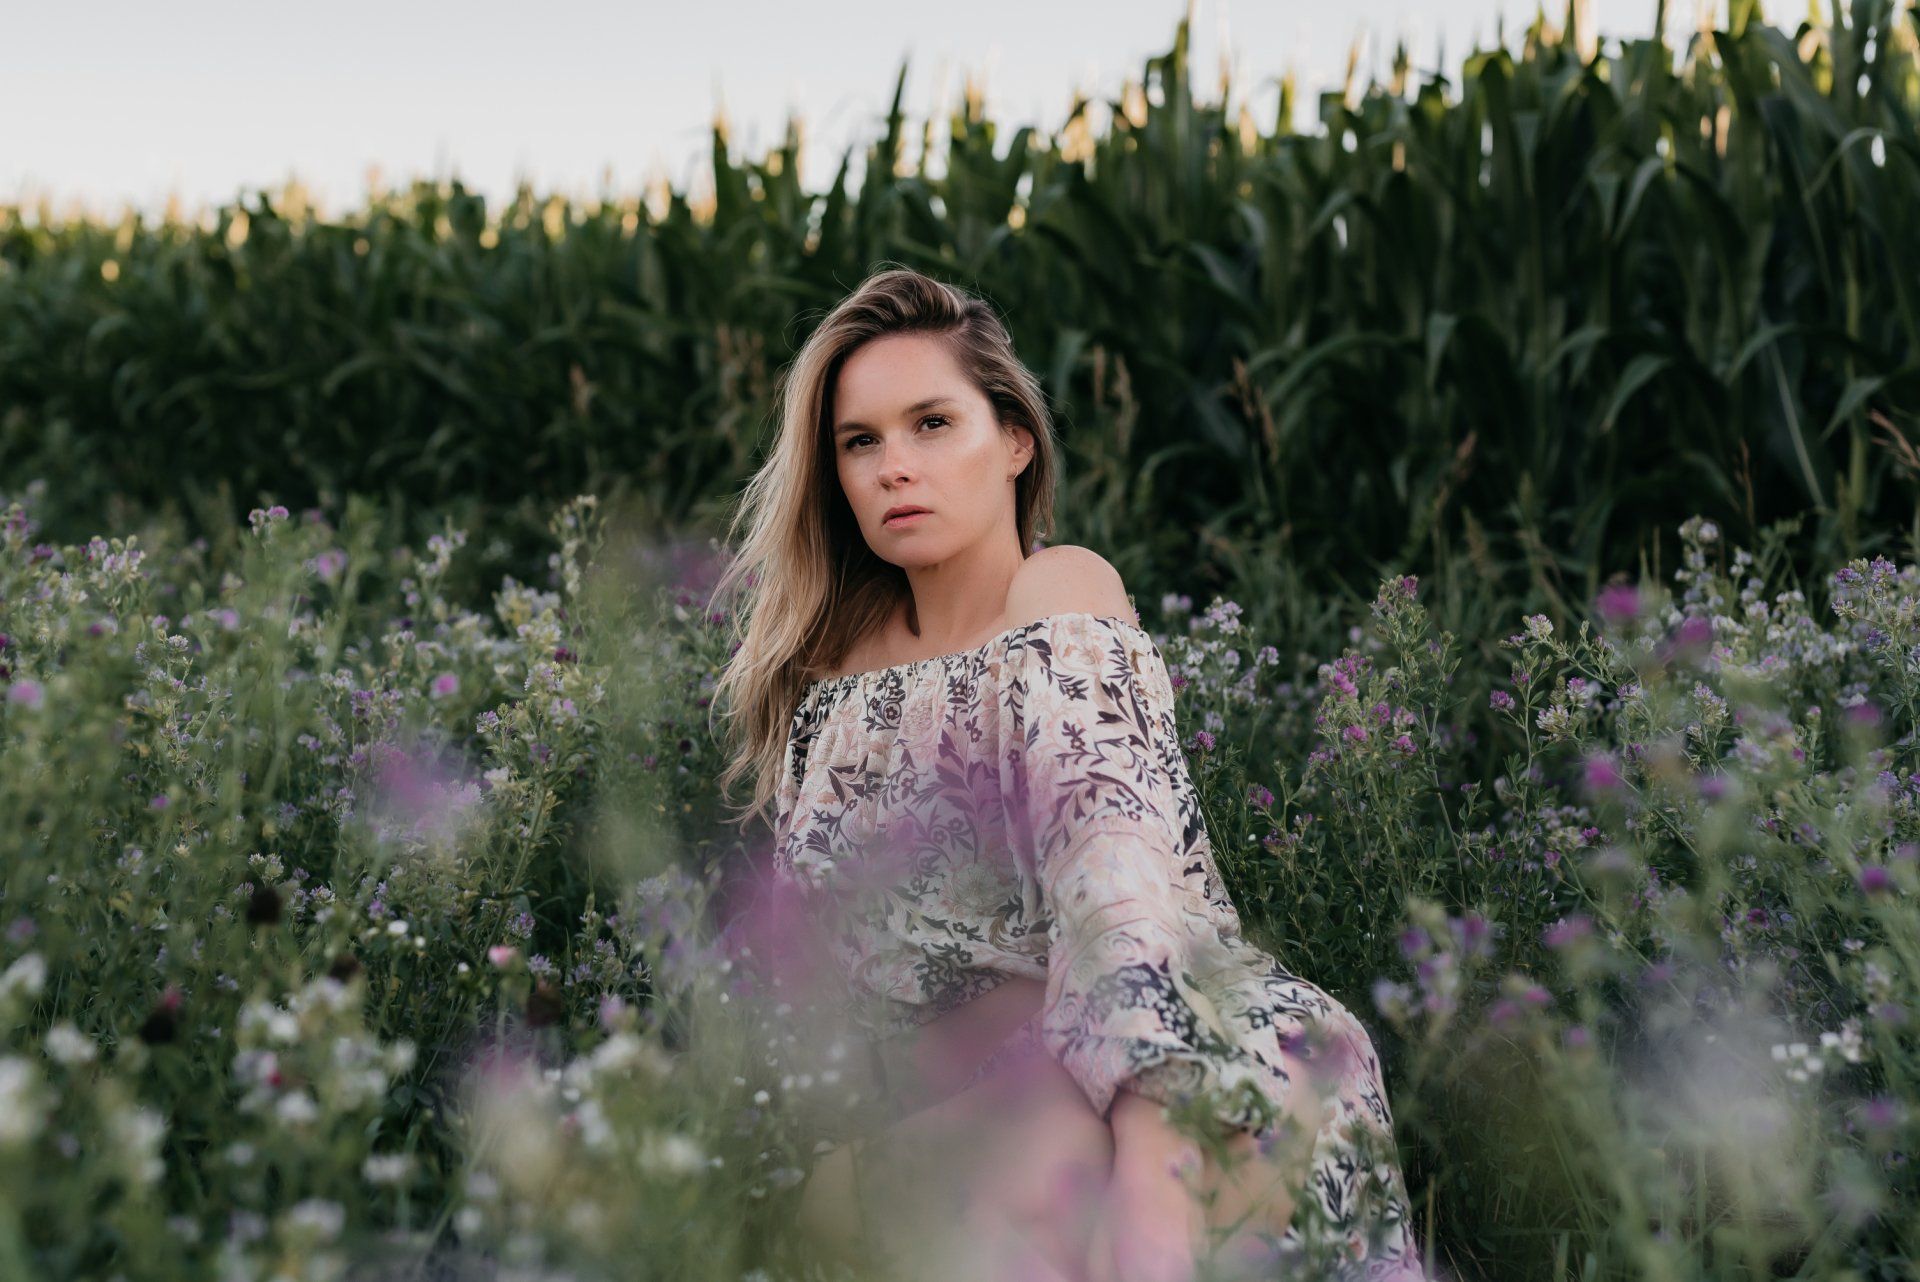 Personal branding photo of a blond woman wearing a flower blouse while standing in a field of tall wild flowers